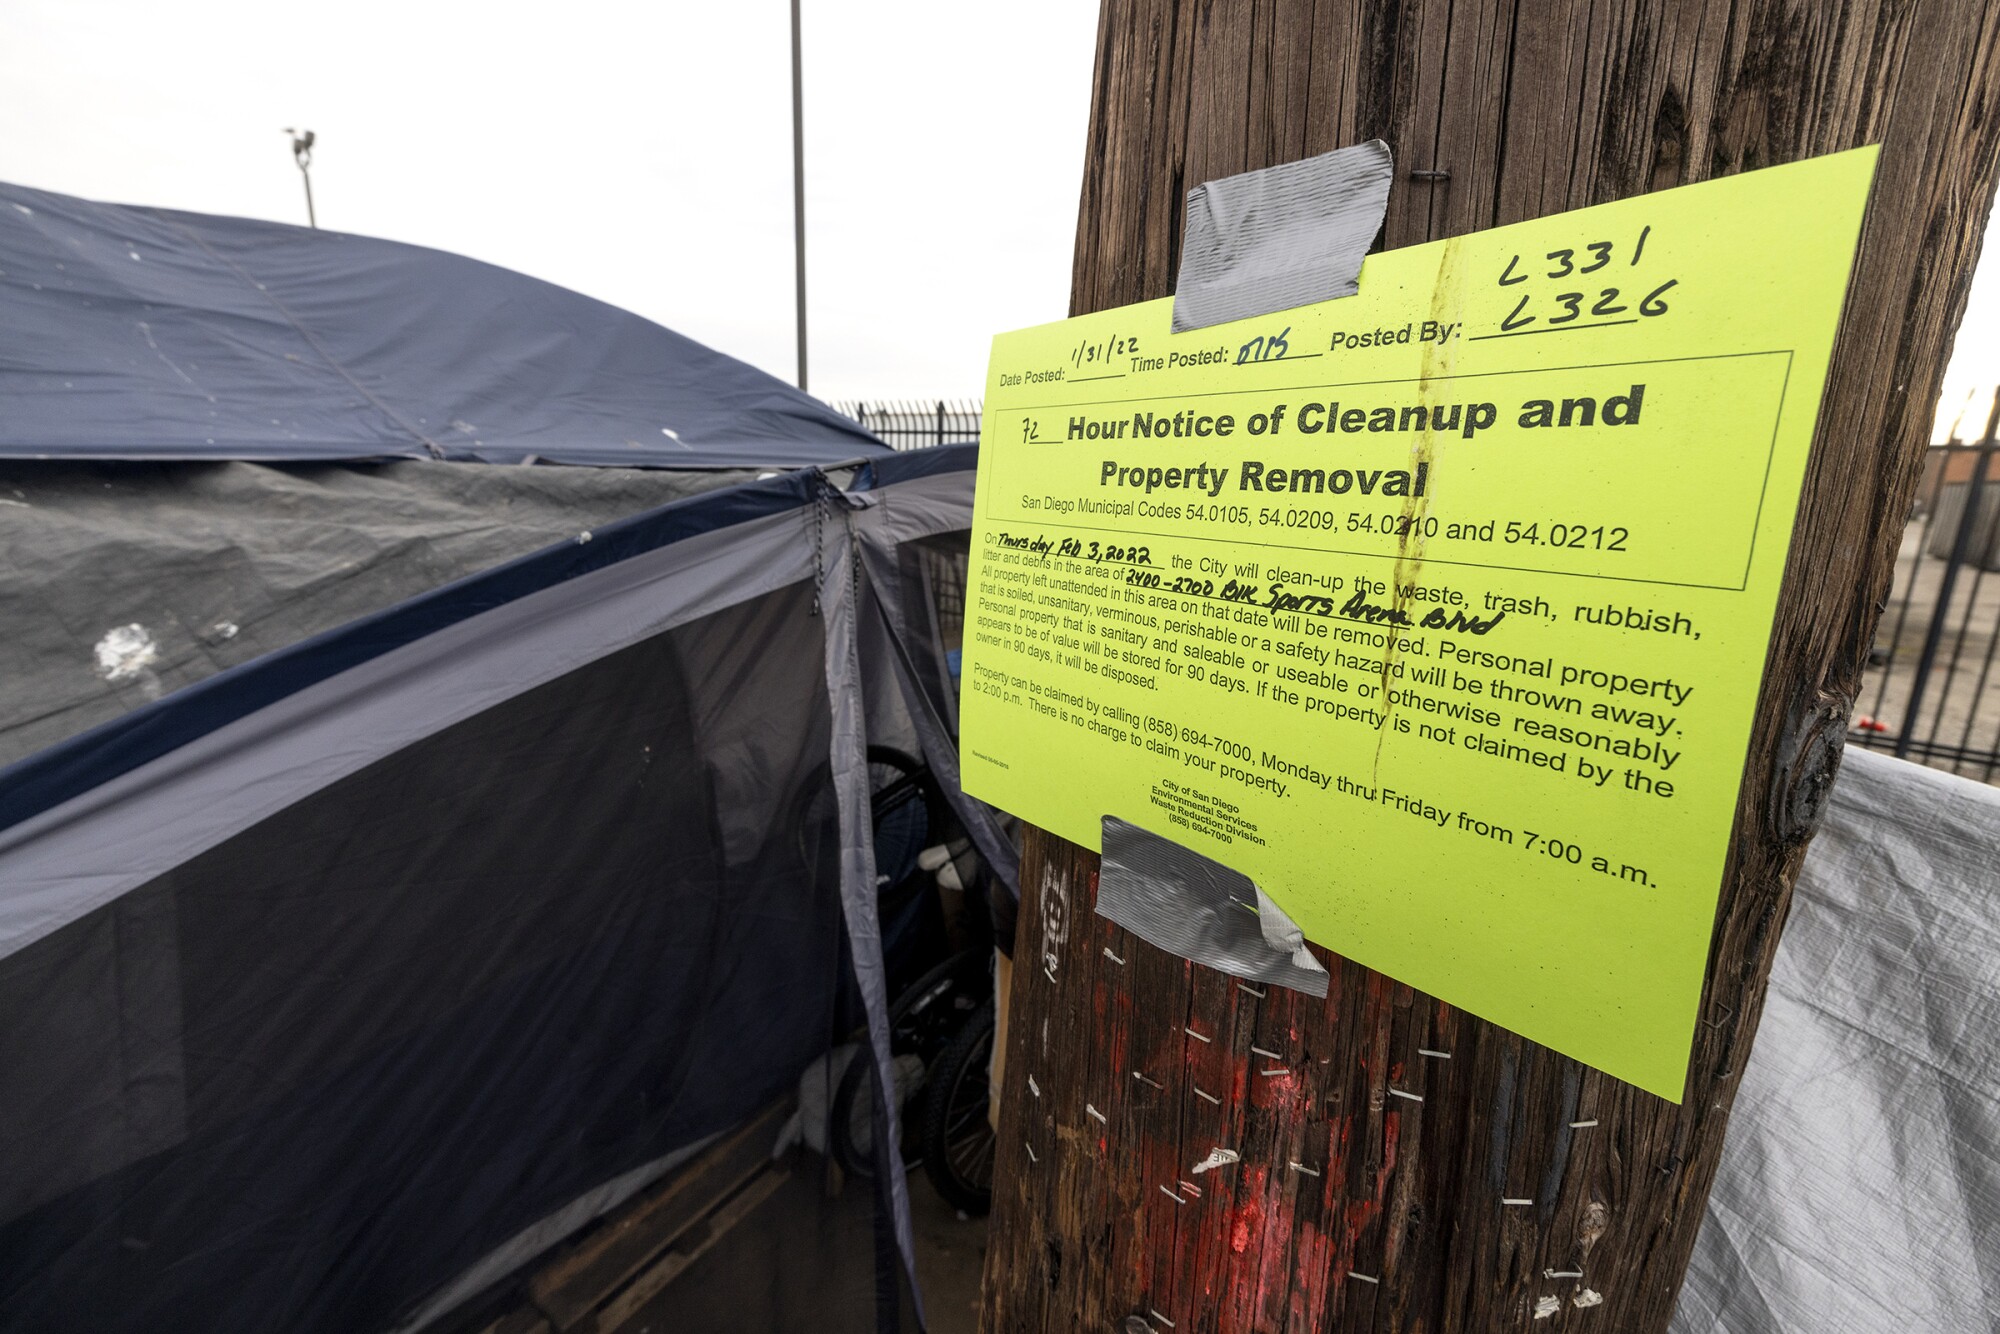 A notice posted on a pole indicating the area where a homeless encampment will be cleared by the city.